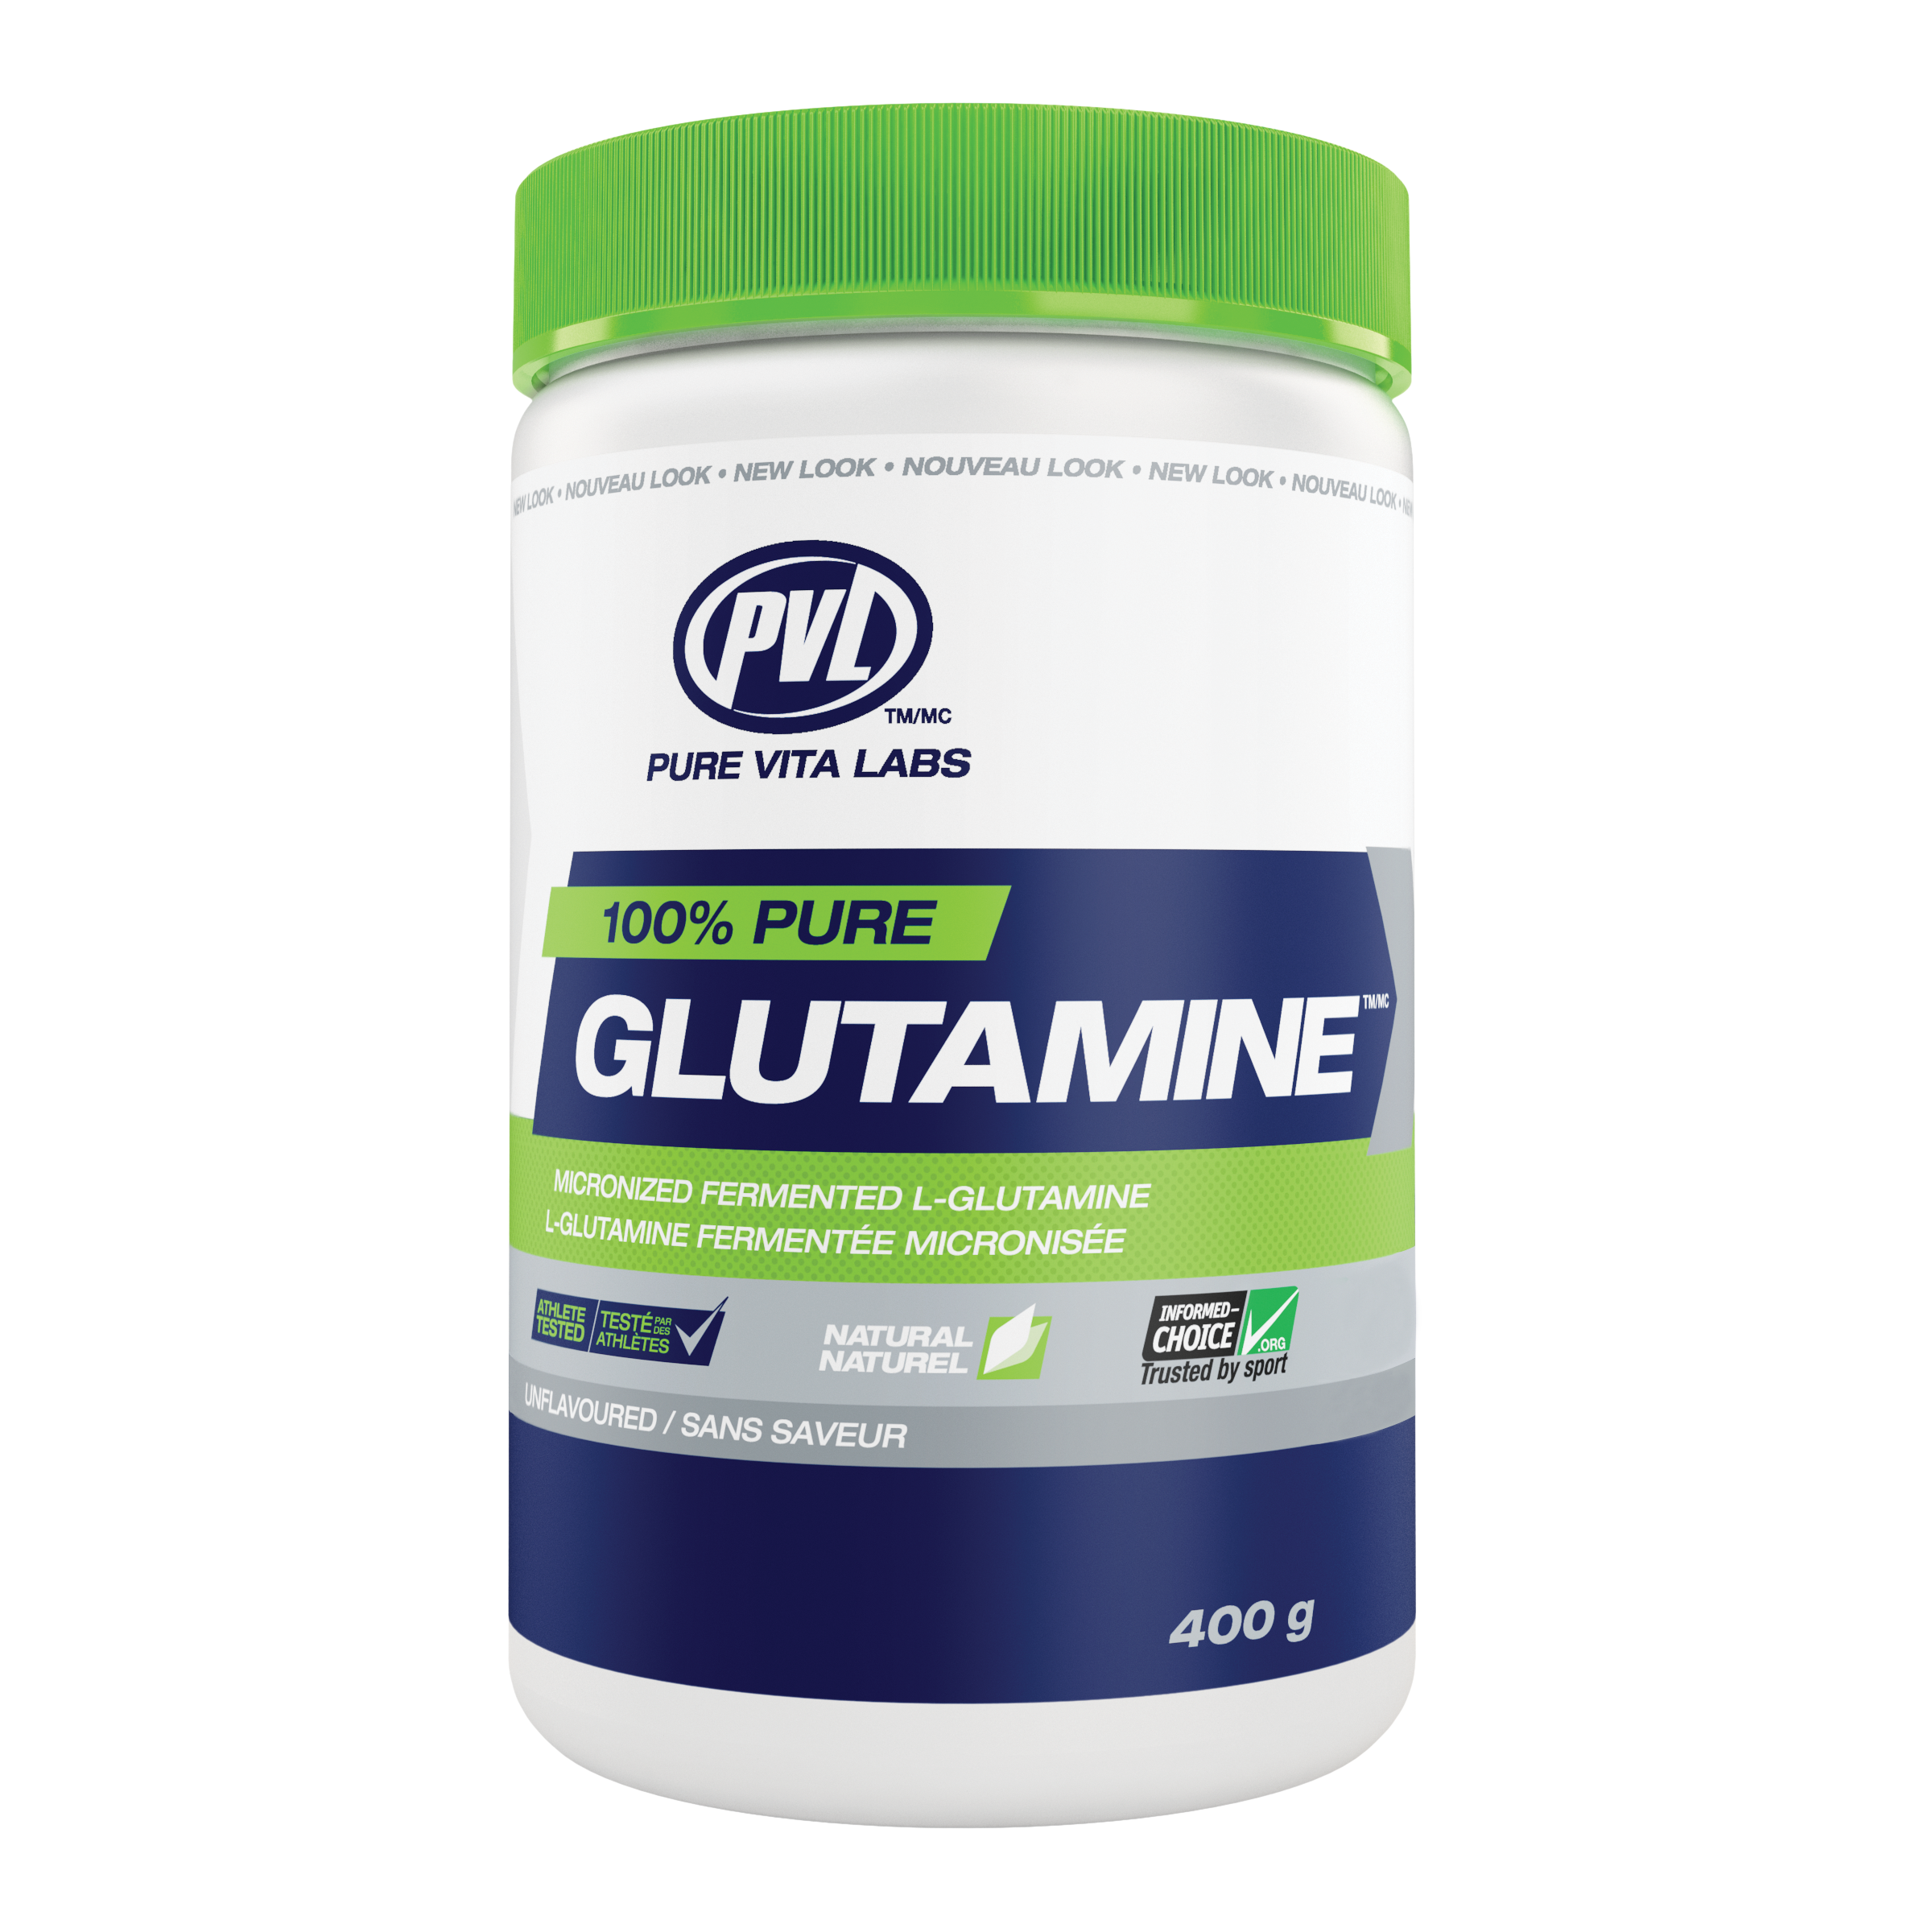 PVL 100% Pure Glutamine - Unflavoured (400g) pvl-100-pure-glutamine-unflavoured-400g BCAAs and Amino Acids PVL